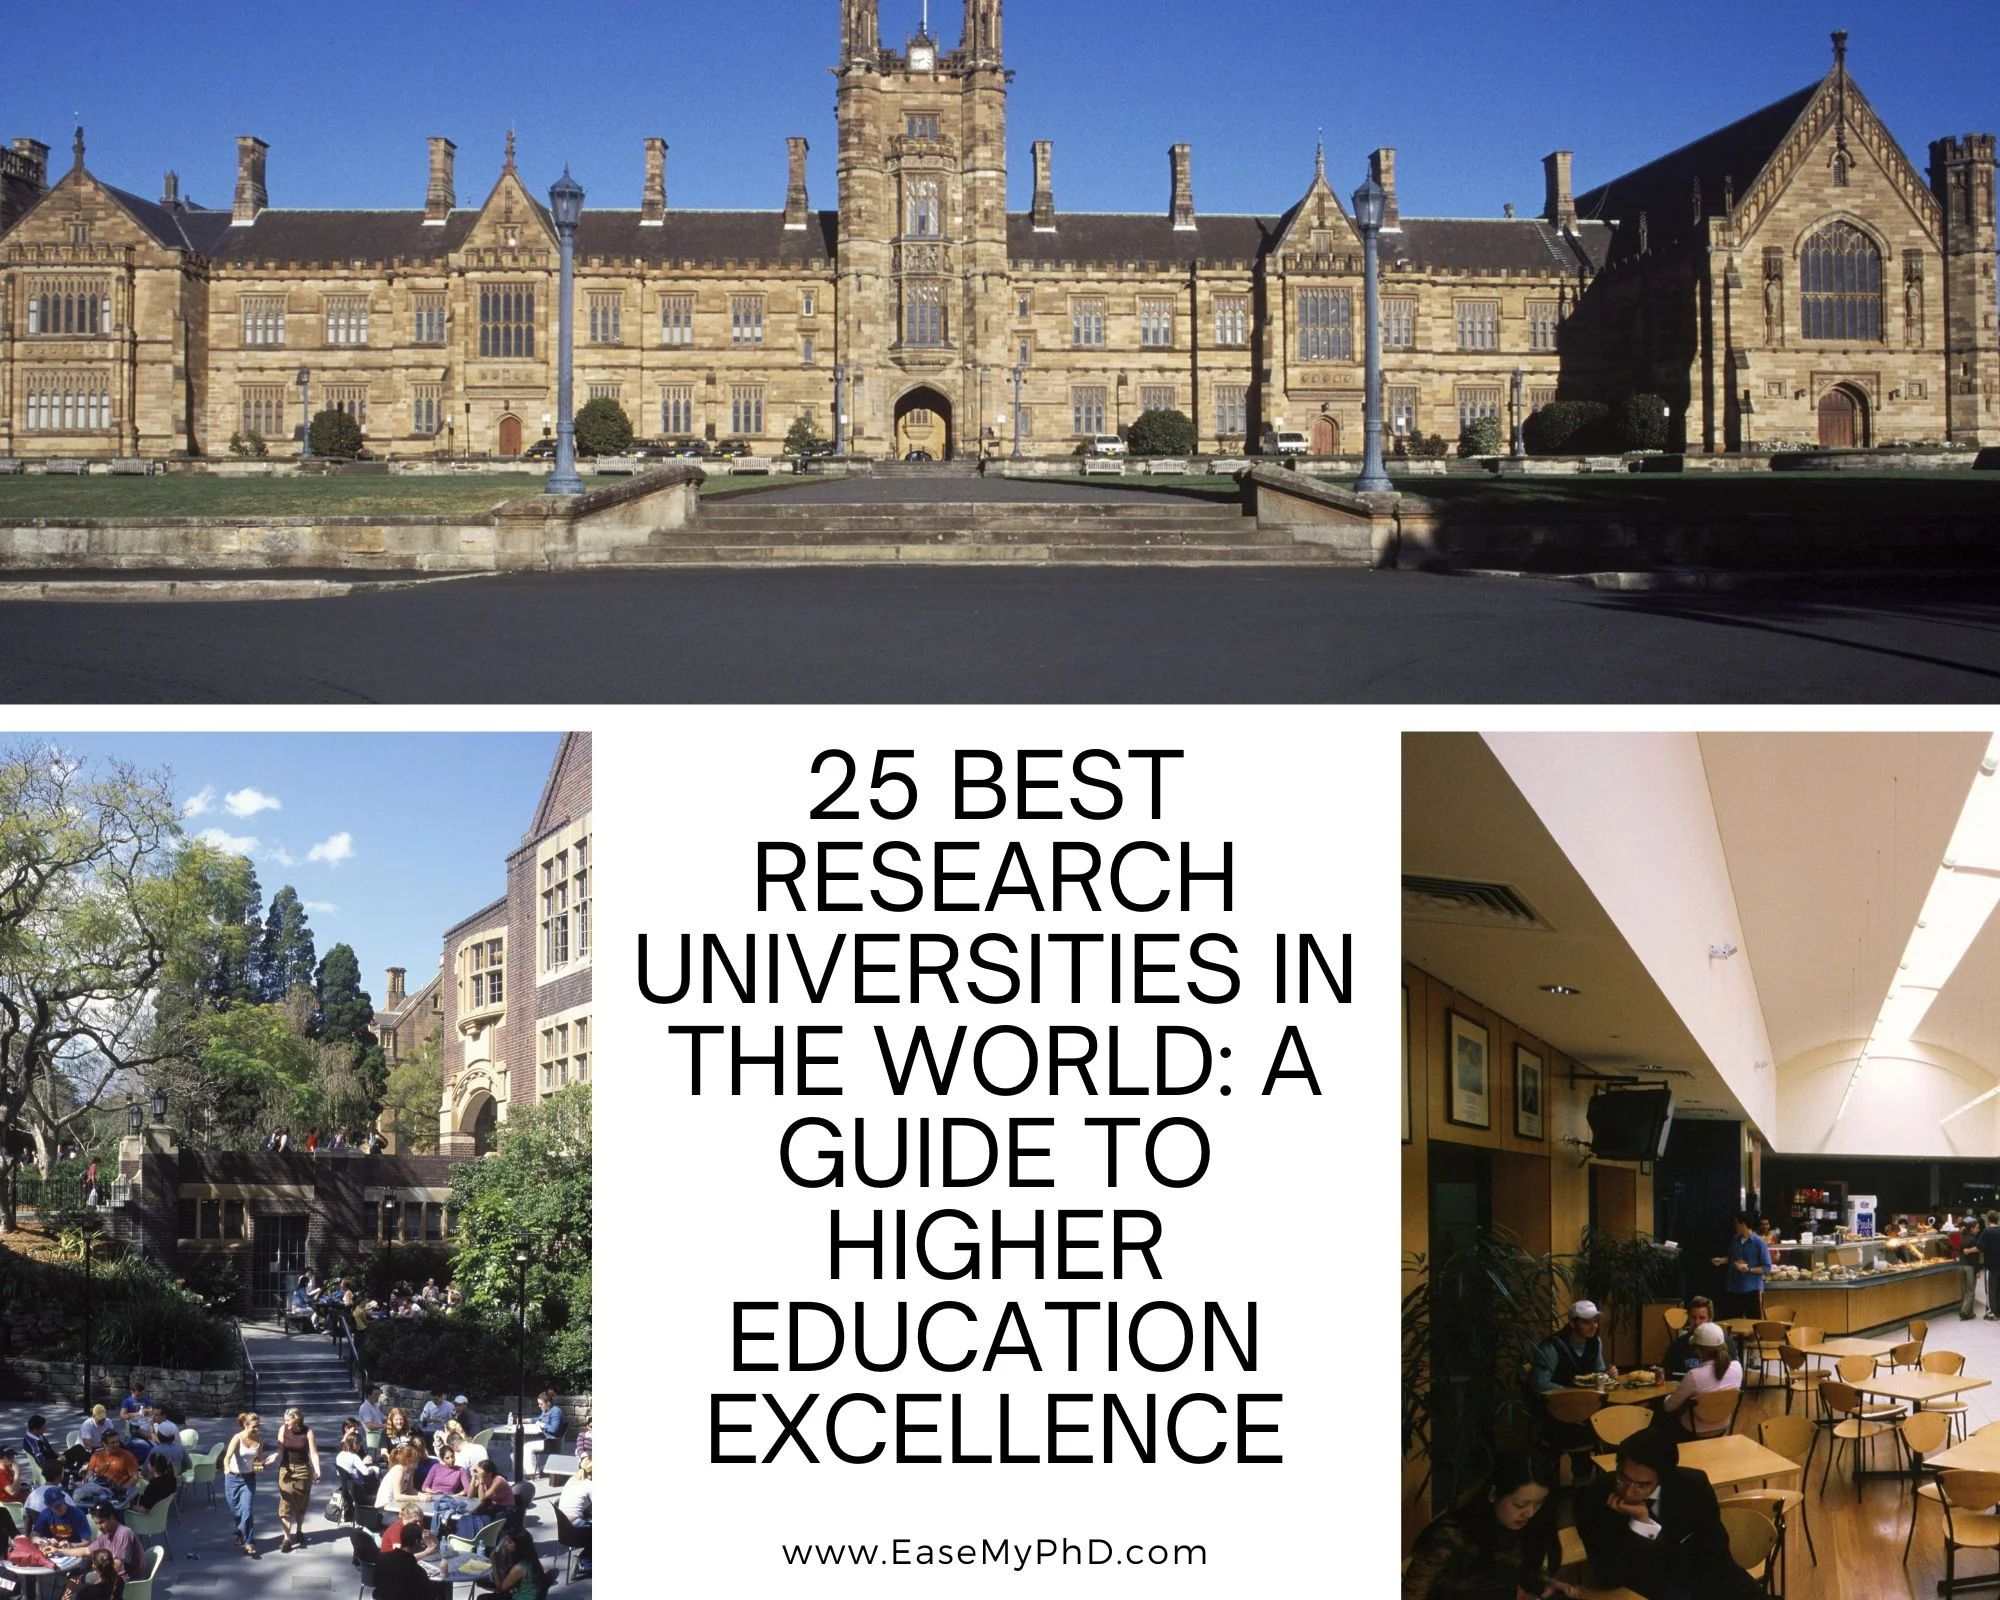 25 Best Research Universities in the World: A Guide to Higher Education Excellence